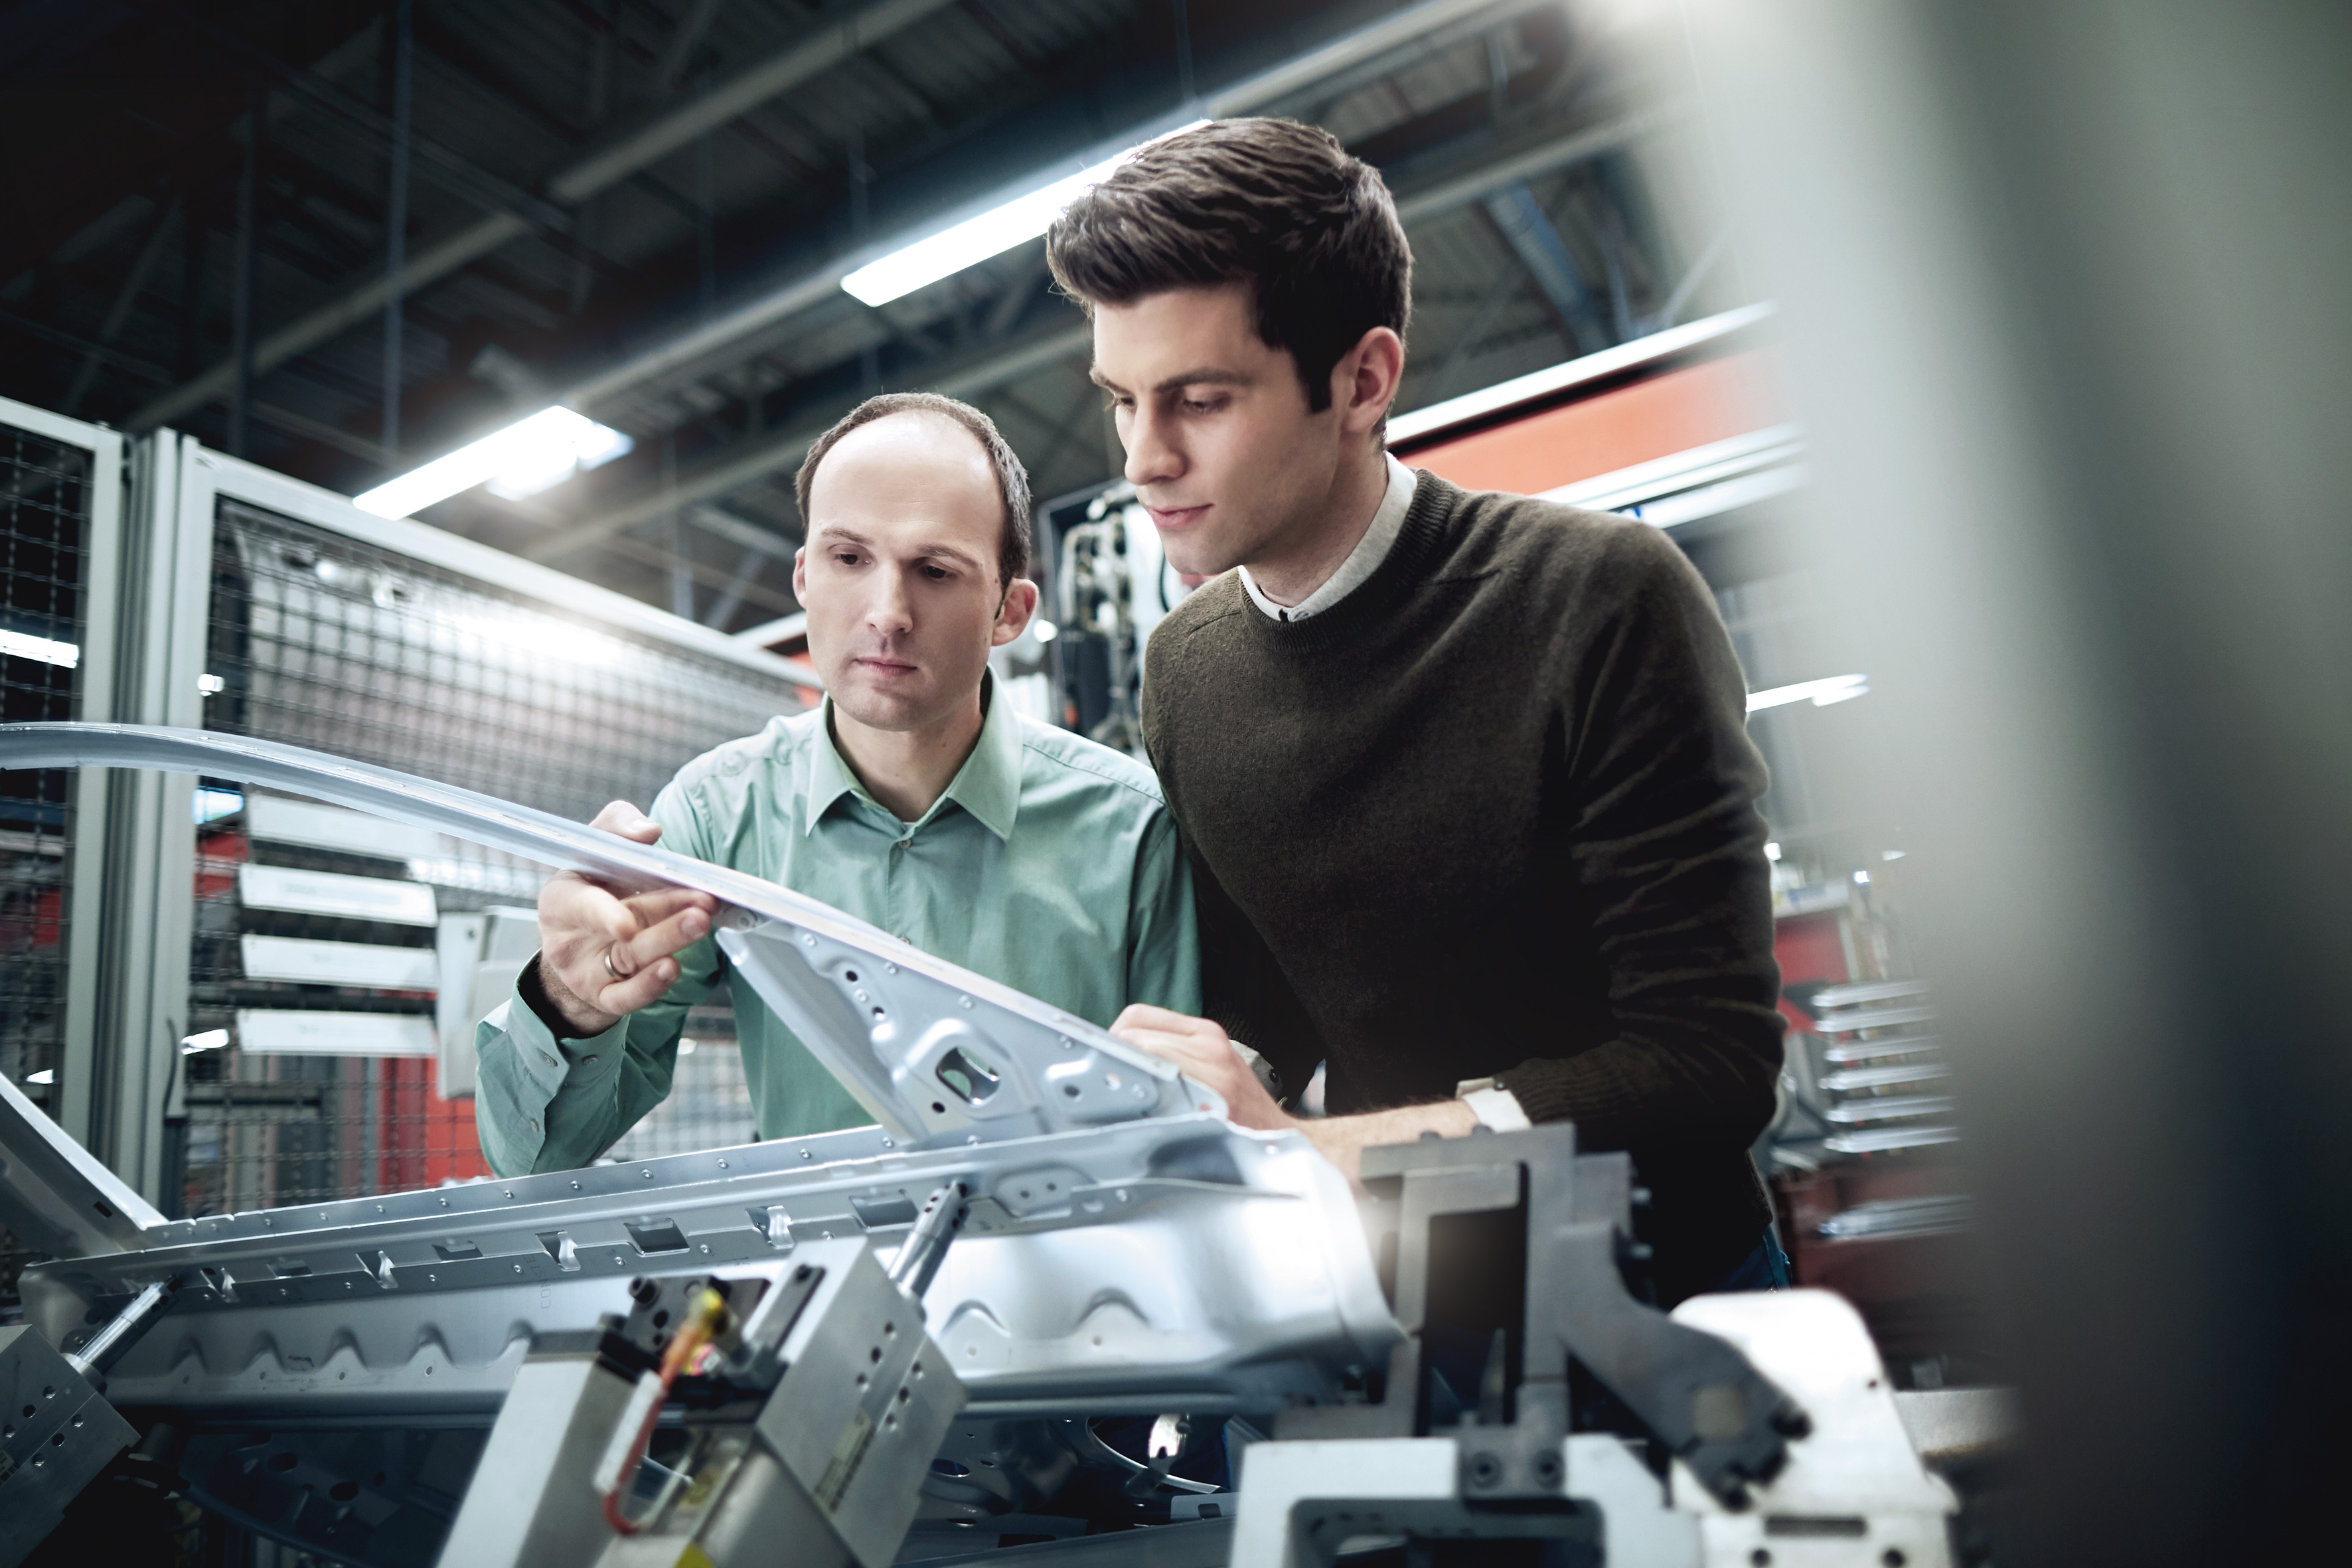 For Dr. Jan-Philipp Weberpals (left), who is responsible for strategic overall planning of laser beam technology at Audi AG in Neckarsulm, the laser is an operating tool that can take on several tasks.